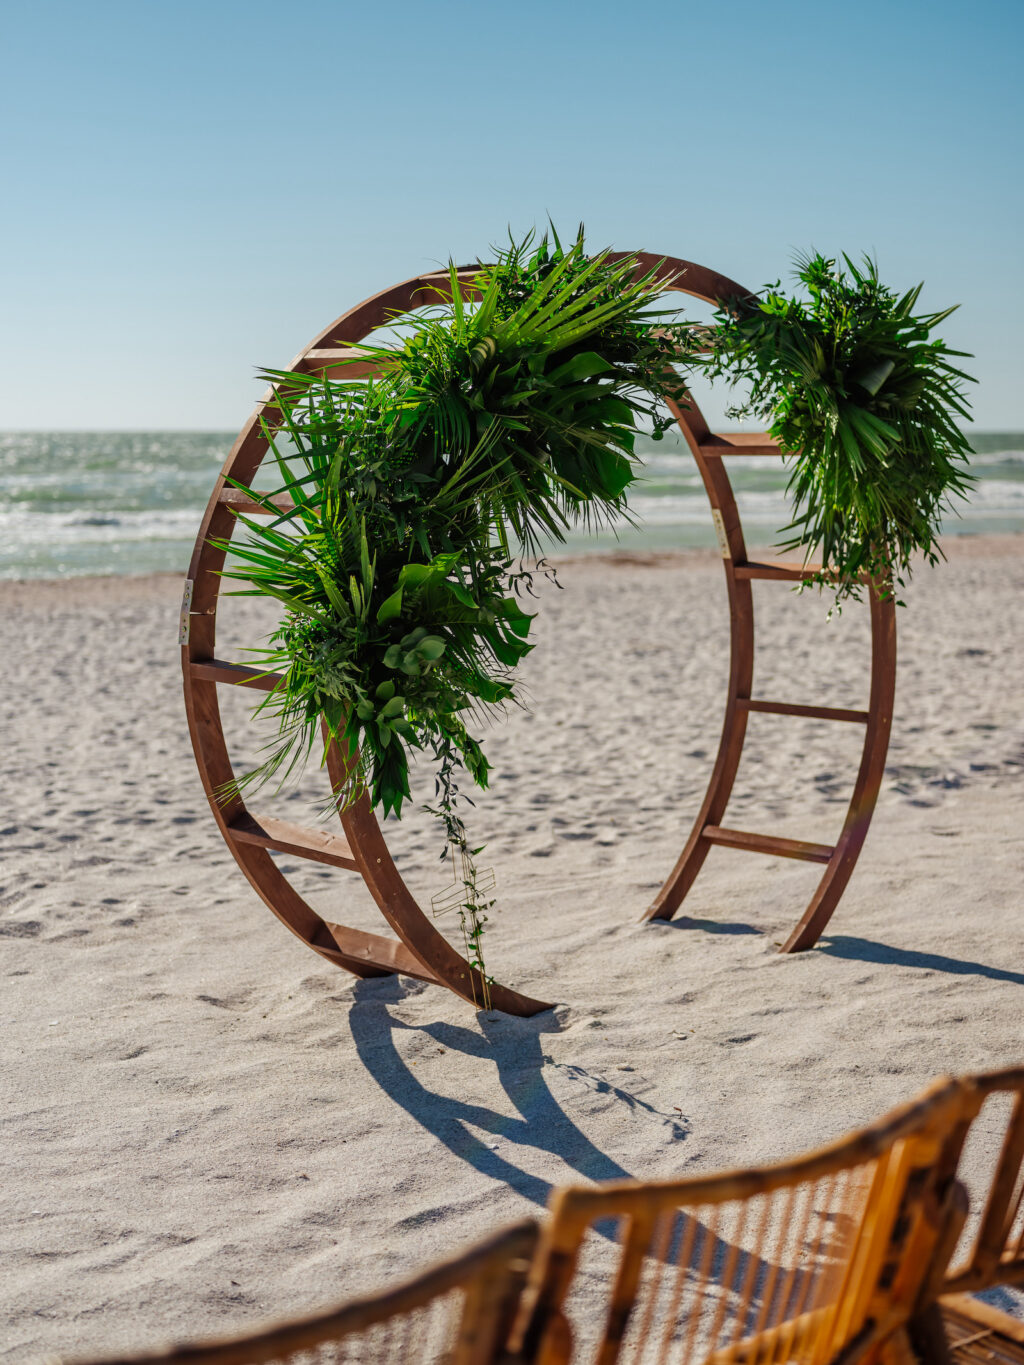 Tampa Bay Beachfront Ceremony, Wooden Circle Arch with Tropical Greenery Flora and Decor | Florida Beach Wedding Ceremony